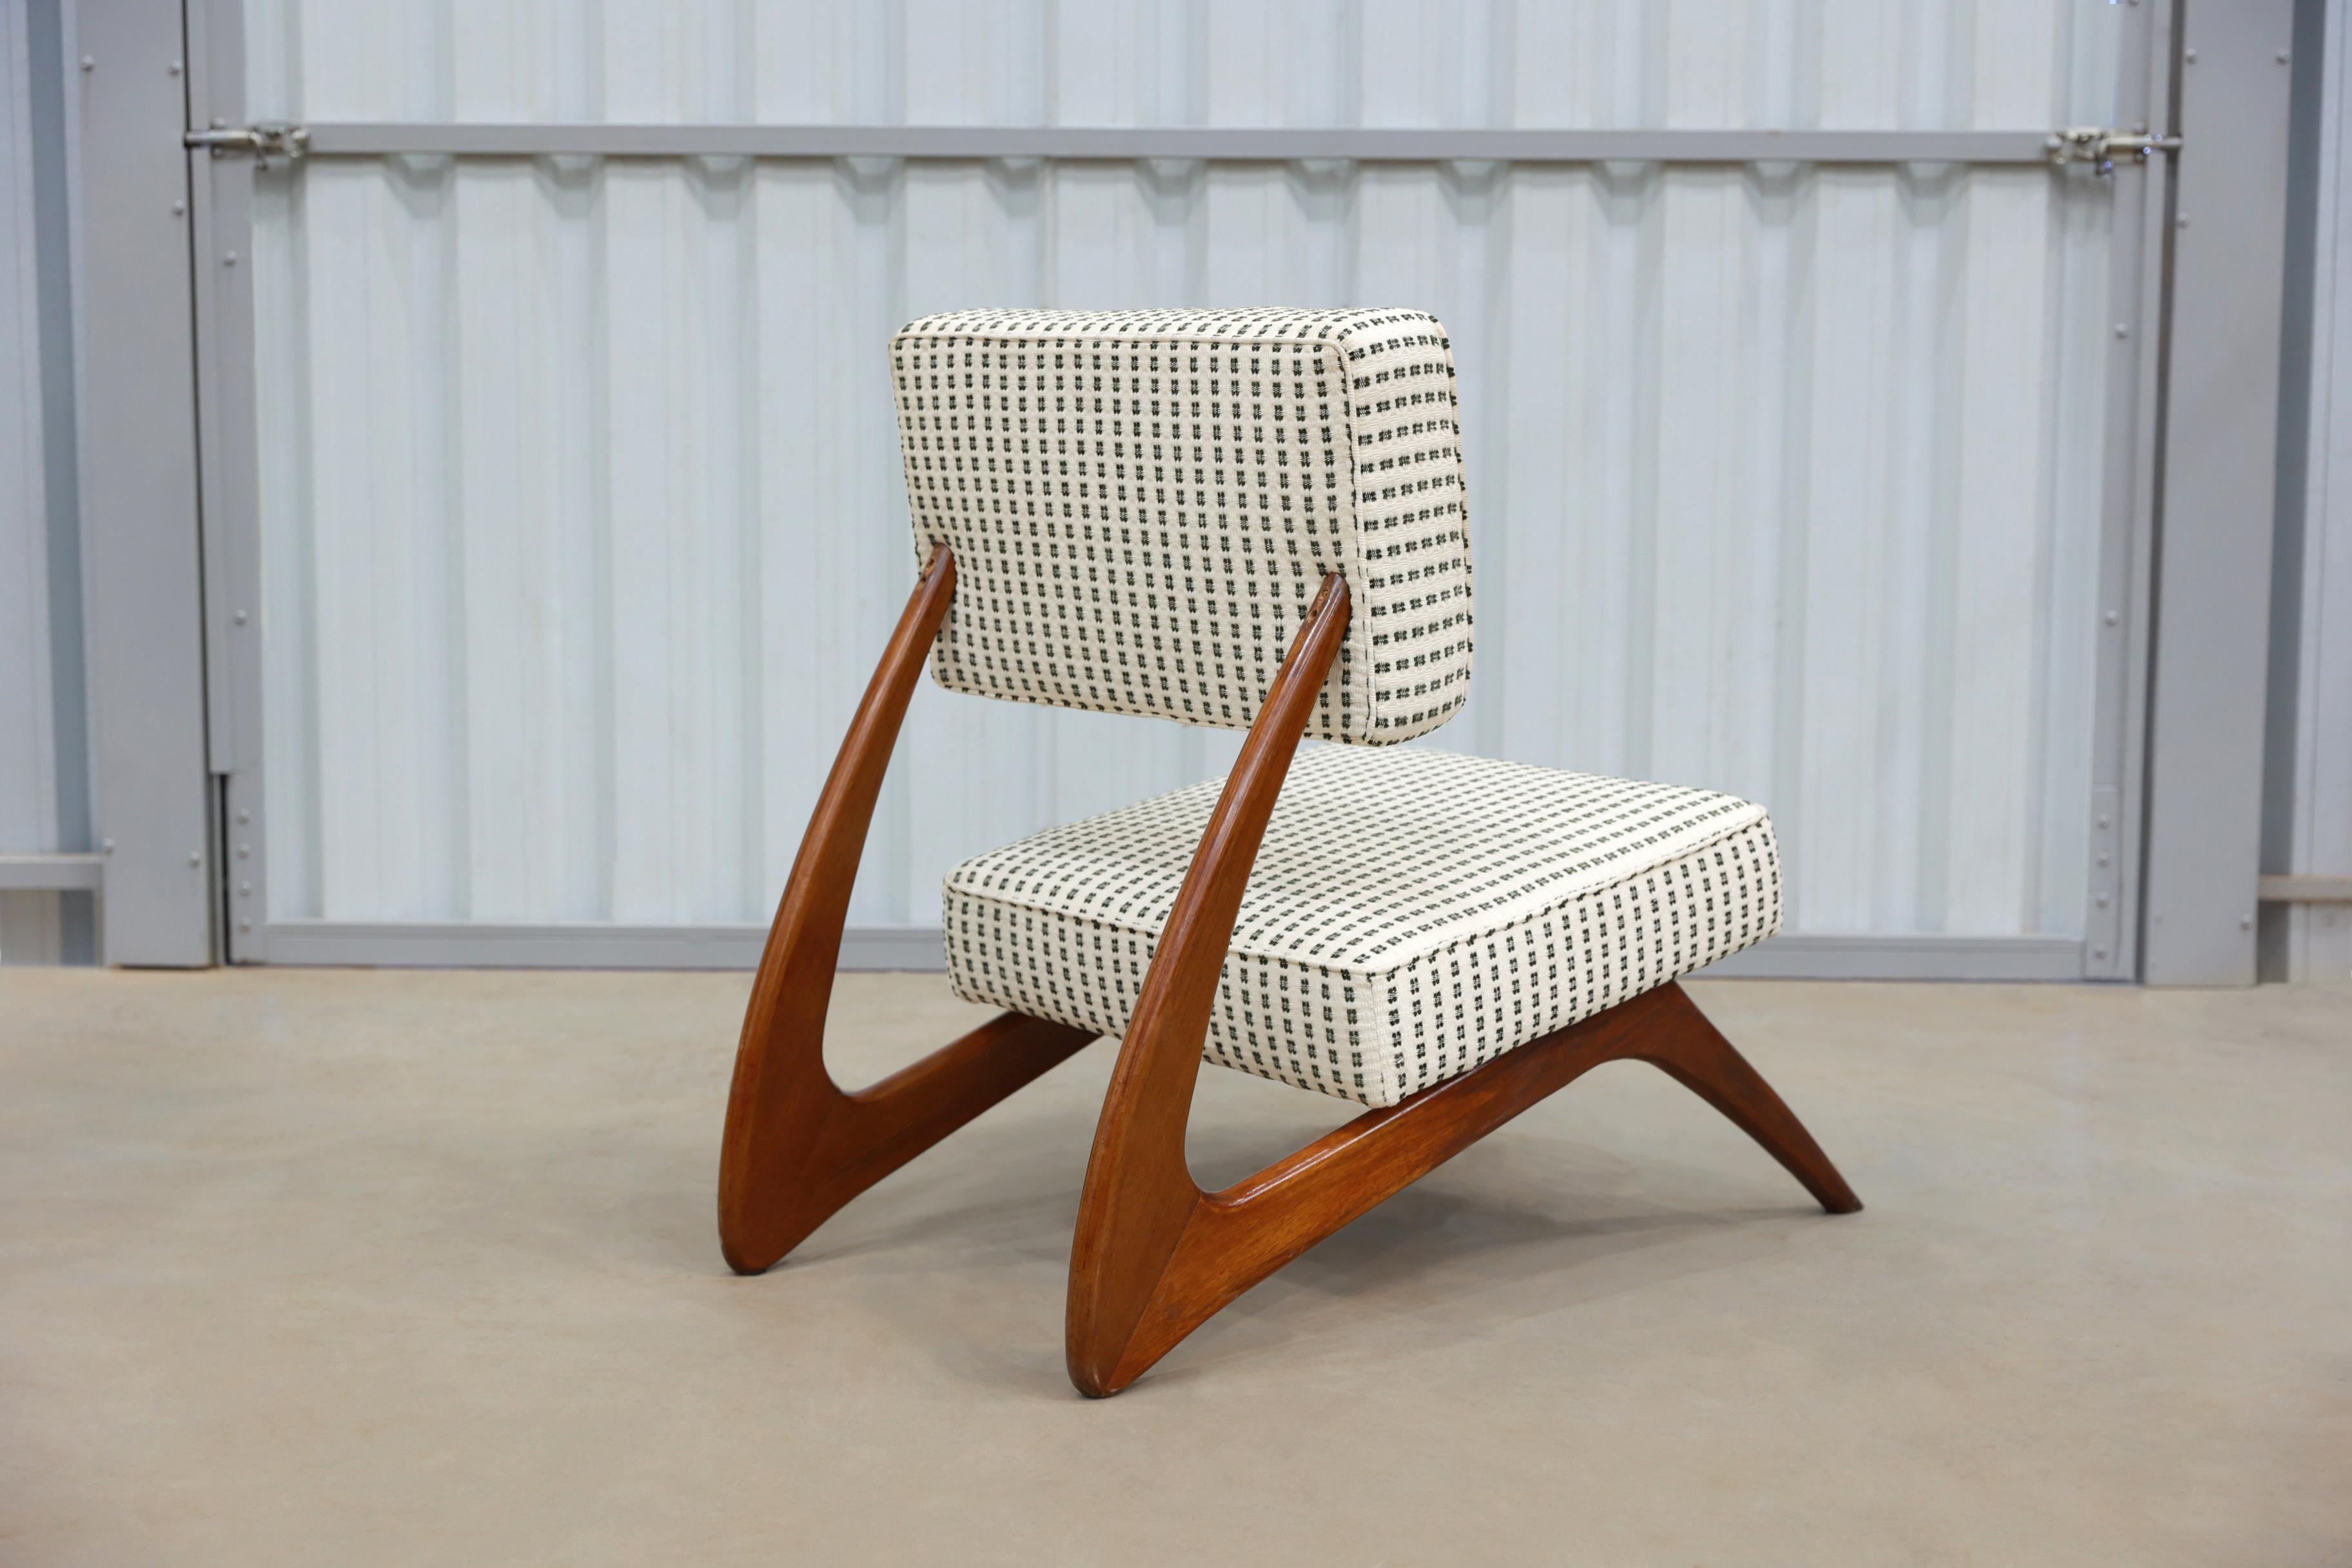 Woodwork Brazilian Modern Lounge Chair in hardwood by Moveis Cimo, Brazil, 1950s For Sale